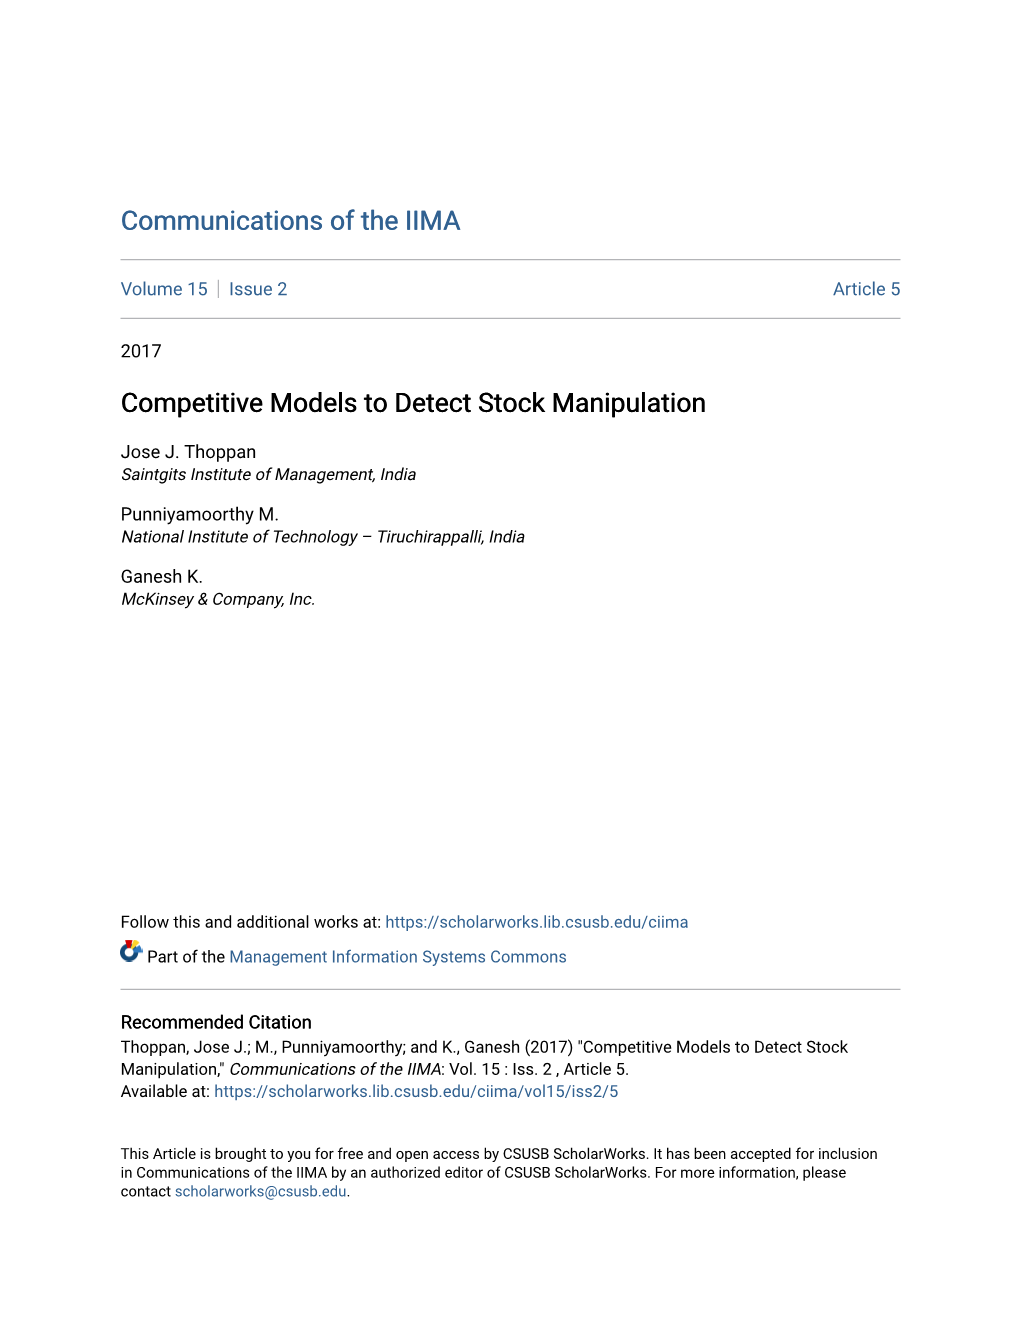 Competitive Models to Detect Stock Manipulation